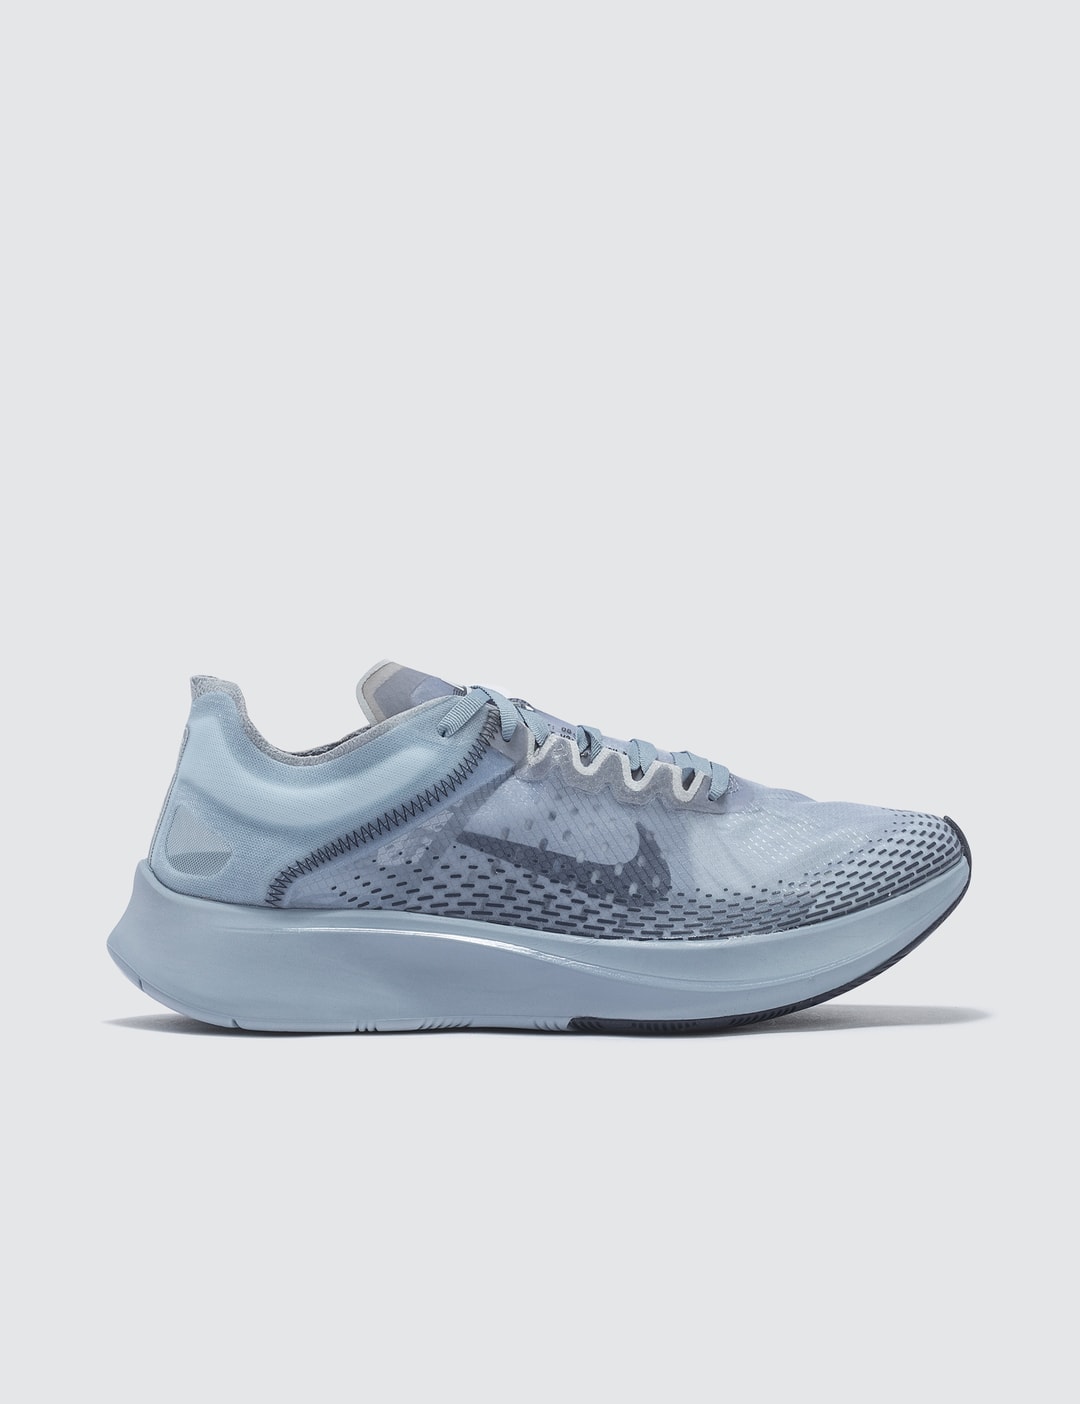 riega la flor binario León Nike - Nike Zoom Fly SP Fast | HBX - Globally Curated Fashion and Lifestyle  by Hypebeast